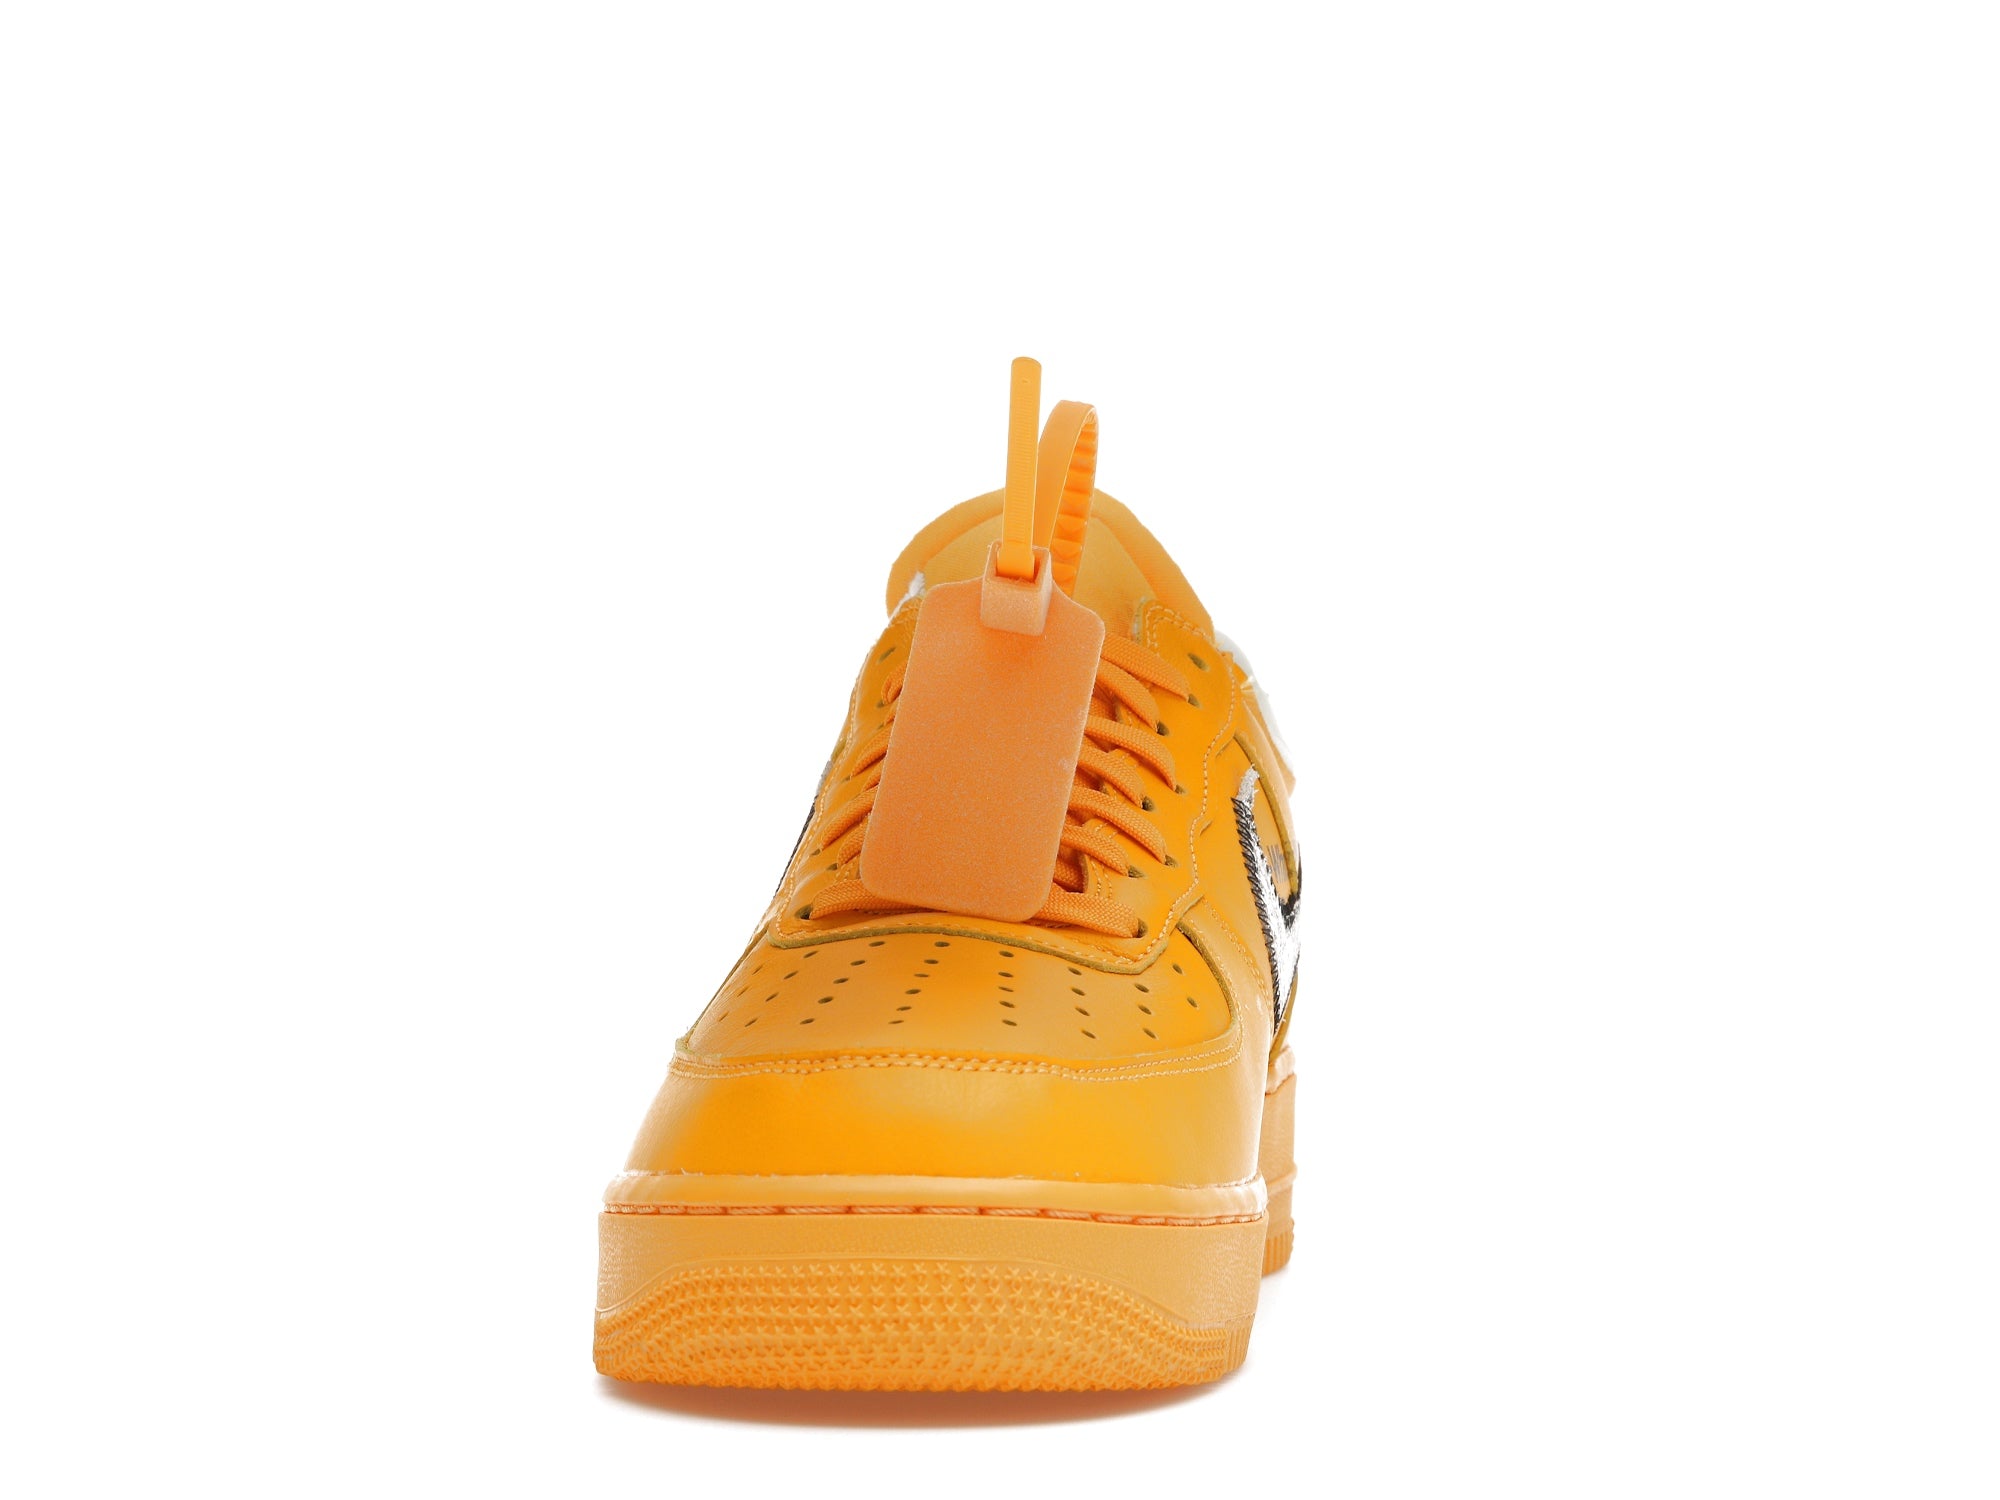 Nike Air Force 1 Low OFF-WHITE University Gold Metallic Silver for sale, Authenticity Guarantee, Afterpay